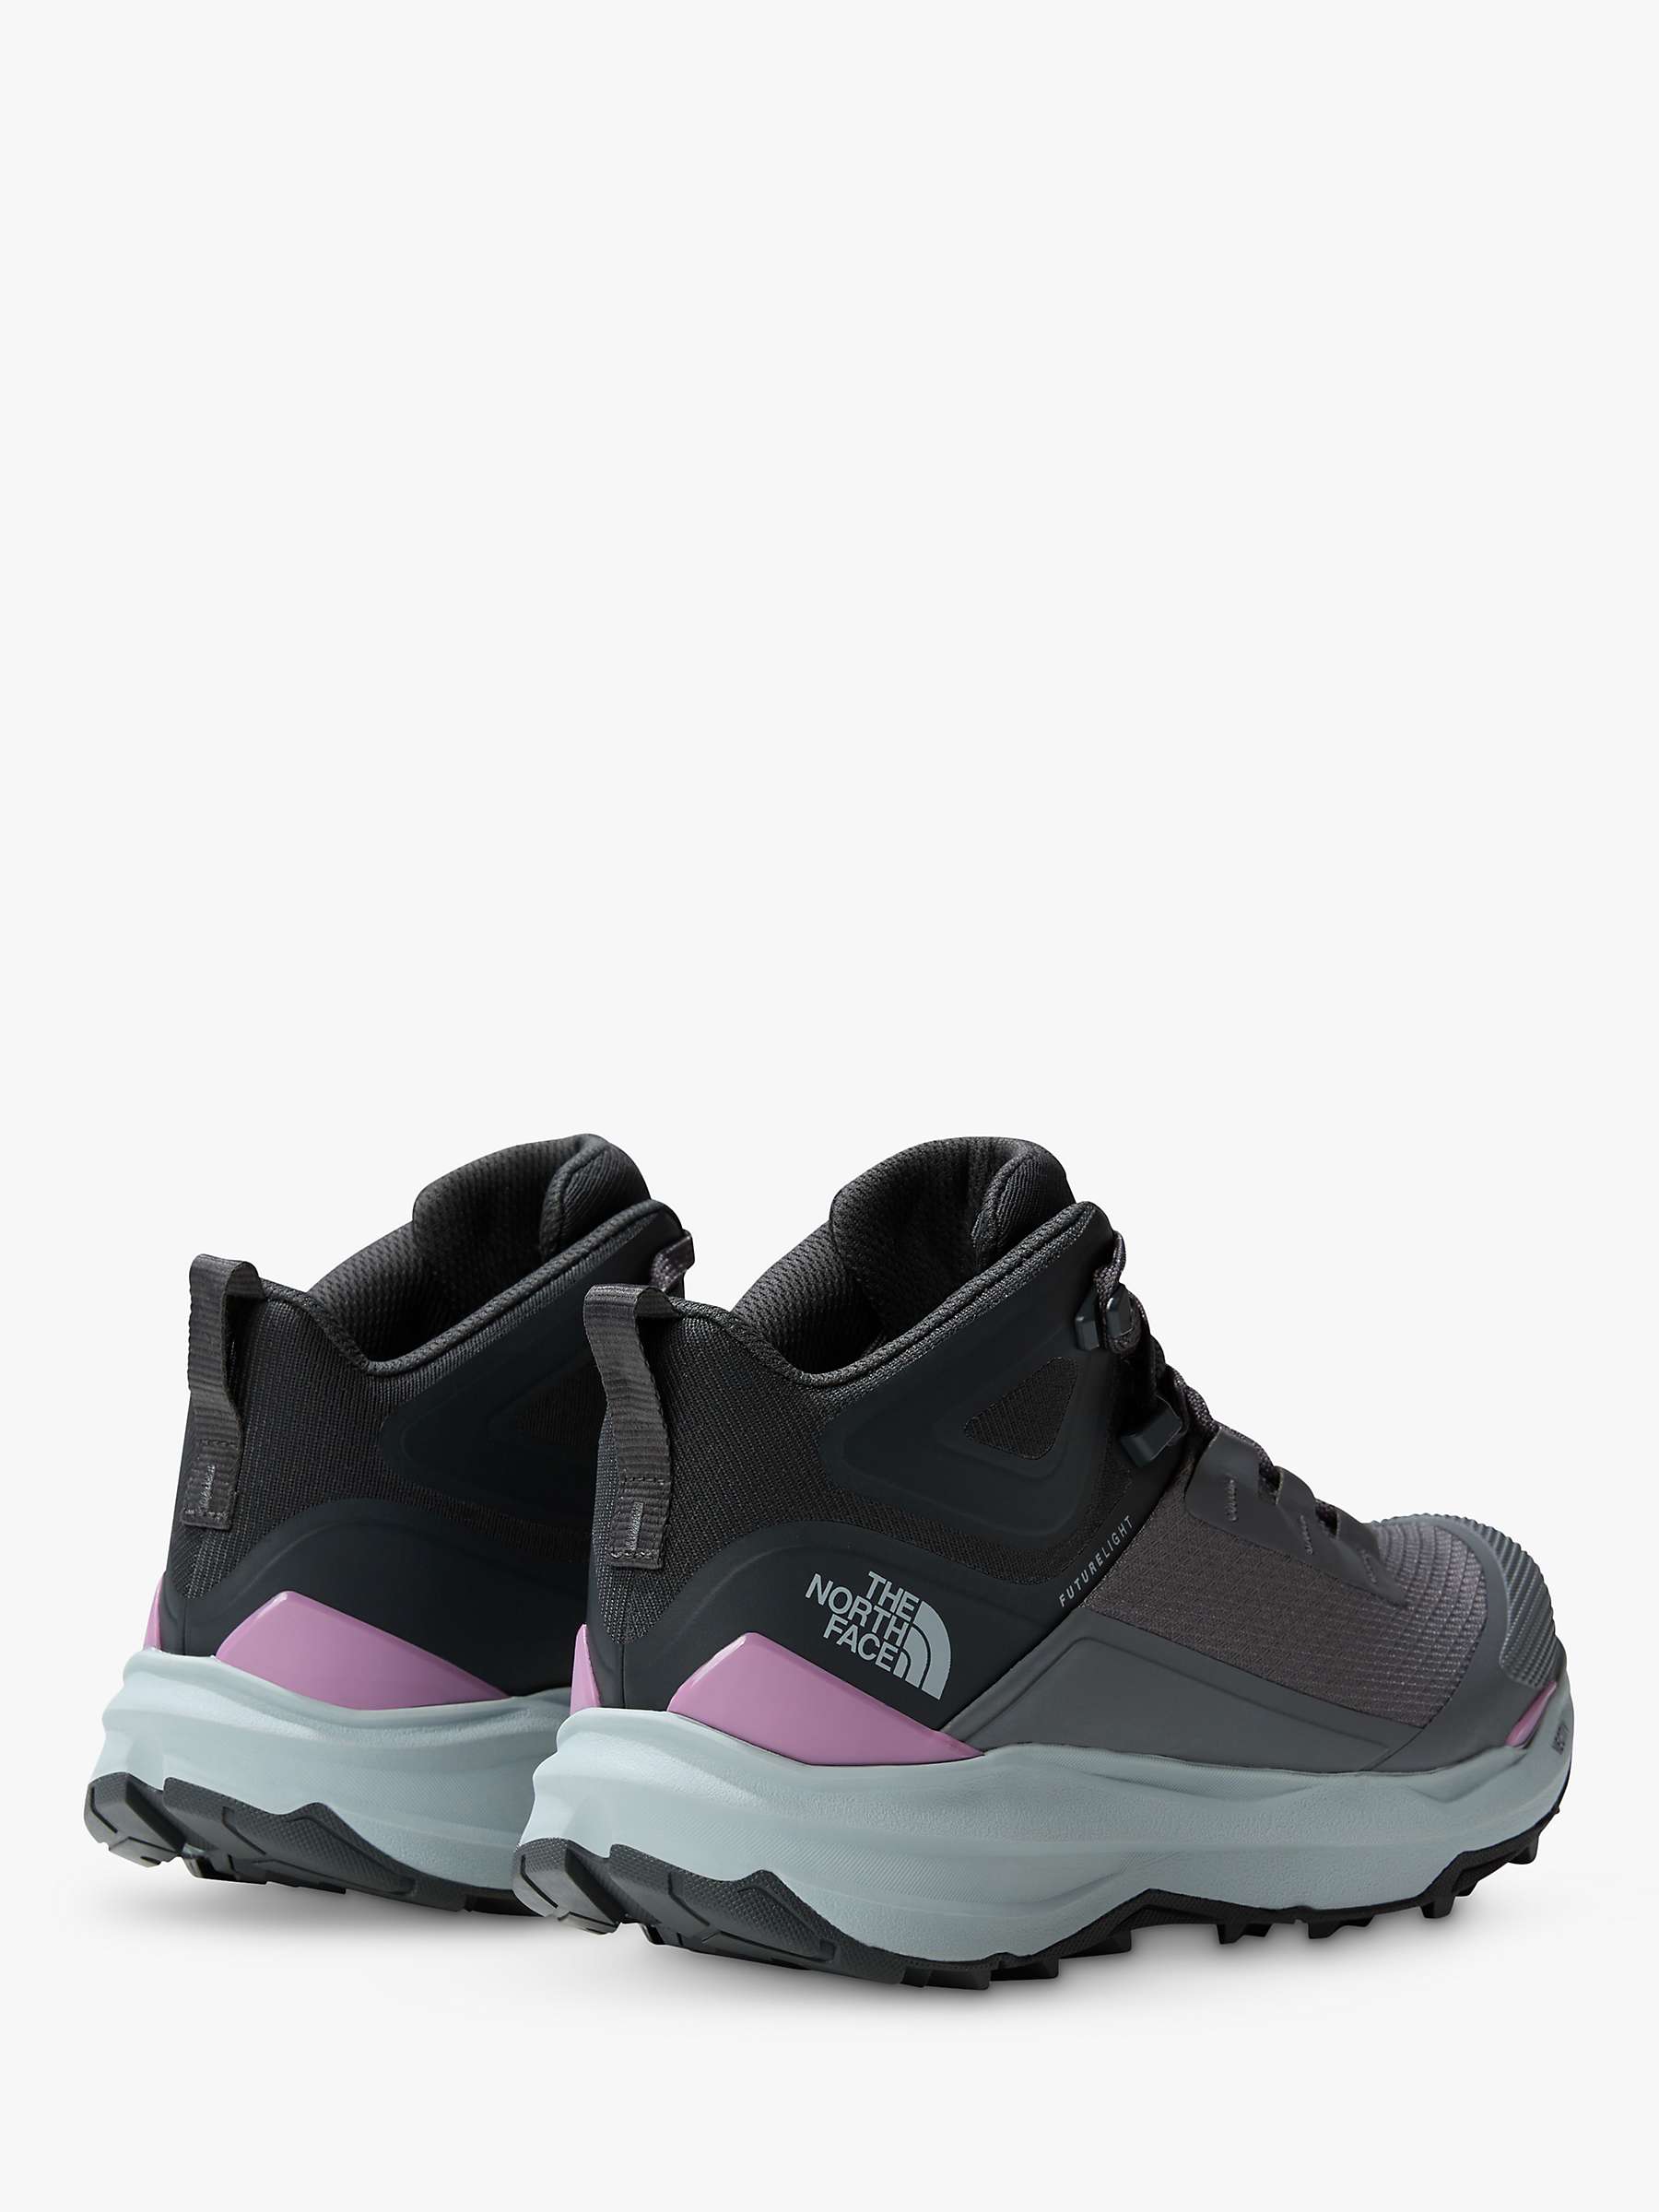 Buy The North Face Exploris II Hiking Boots, Smoked Pearl/Grey Online at johnlewis.com